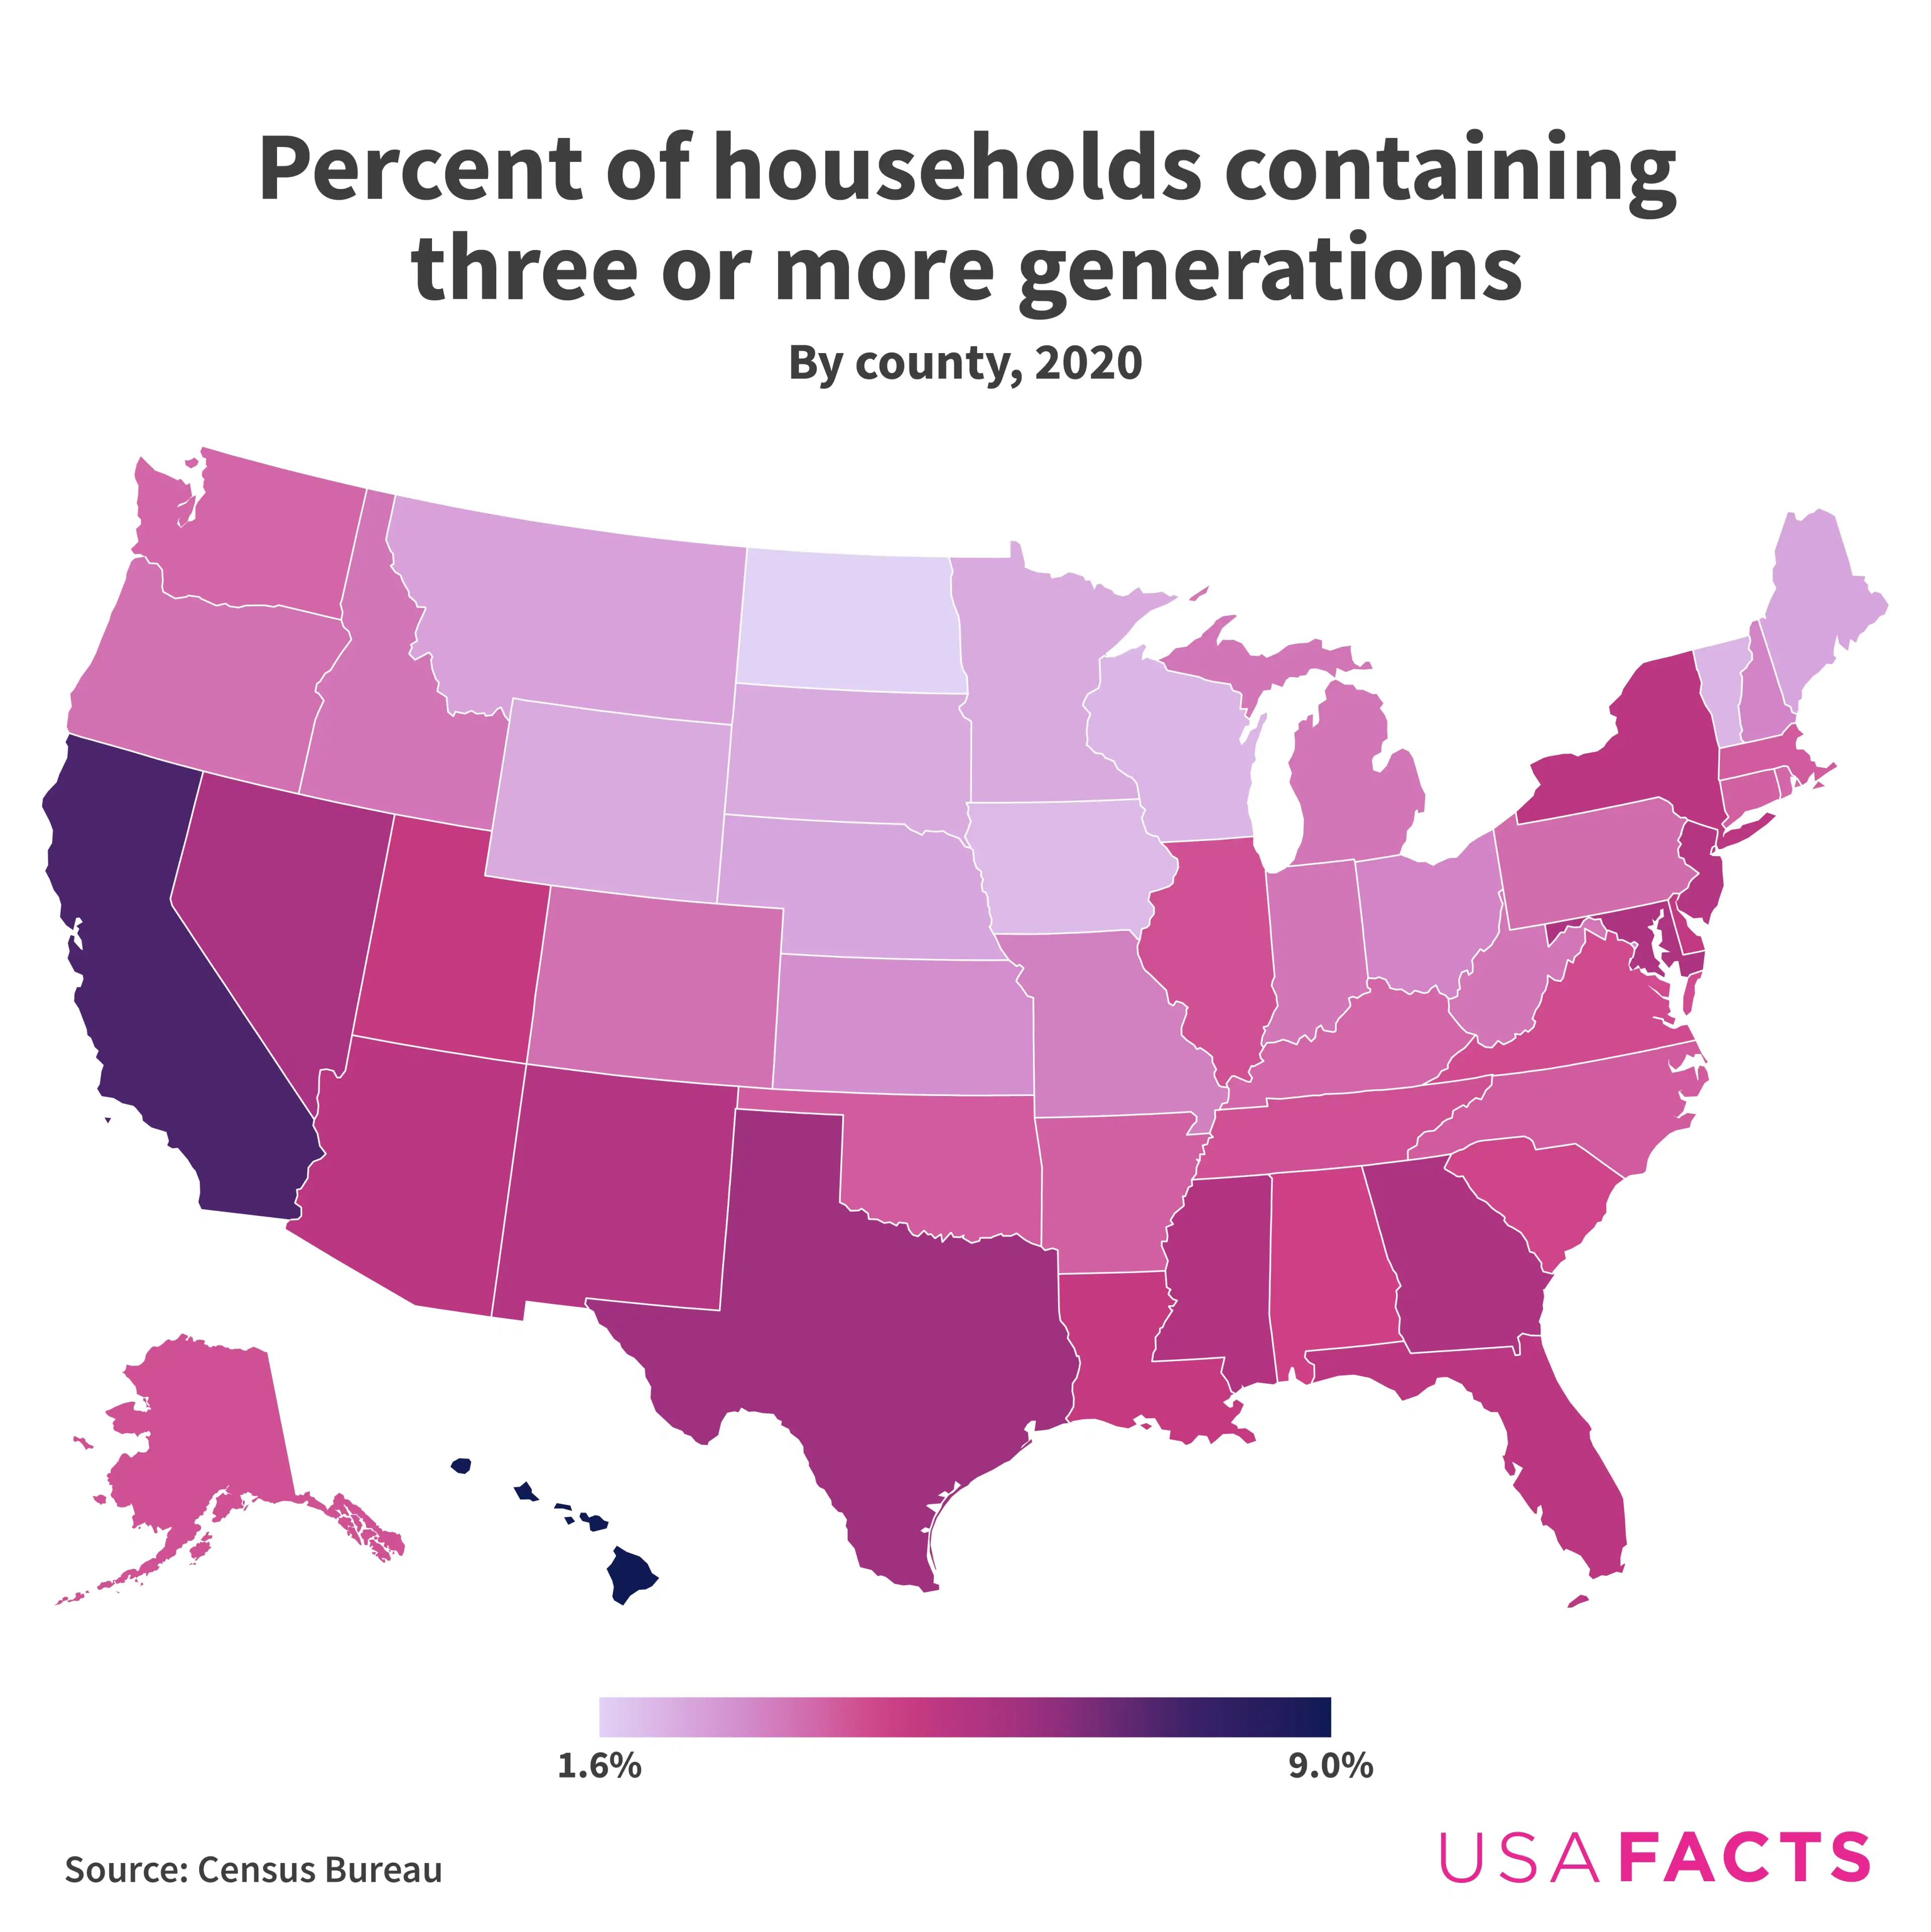 How Common are Multigenerational Households in the U.S.?